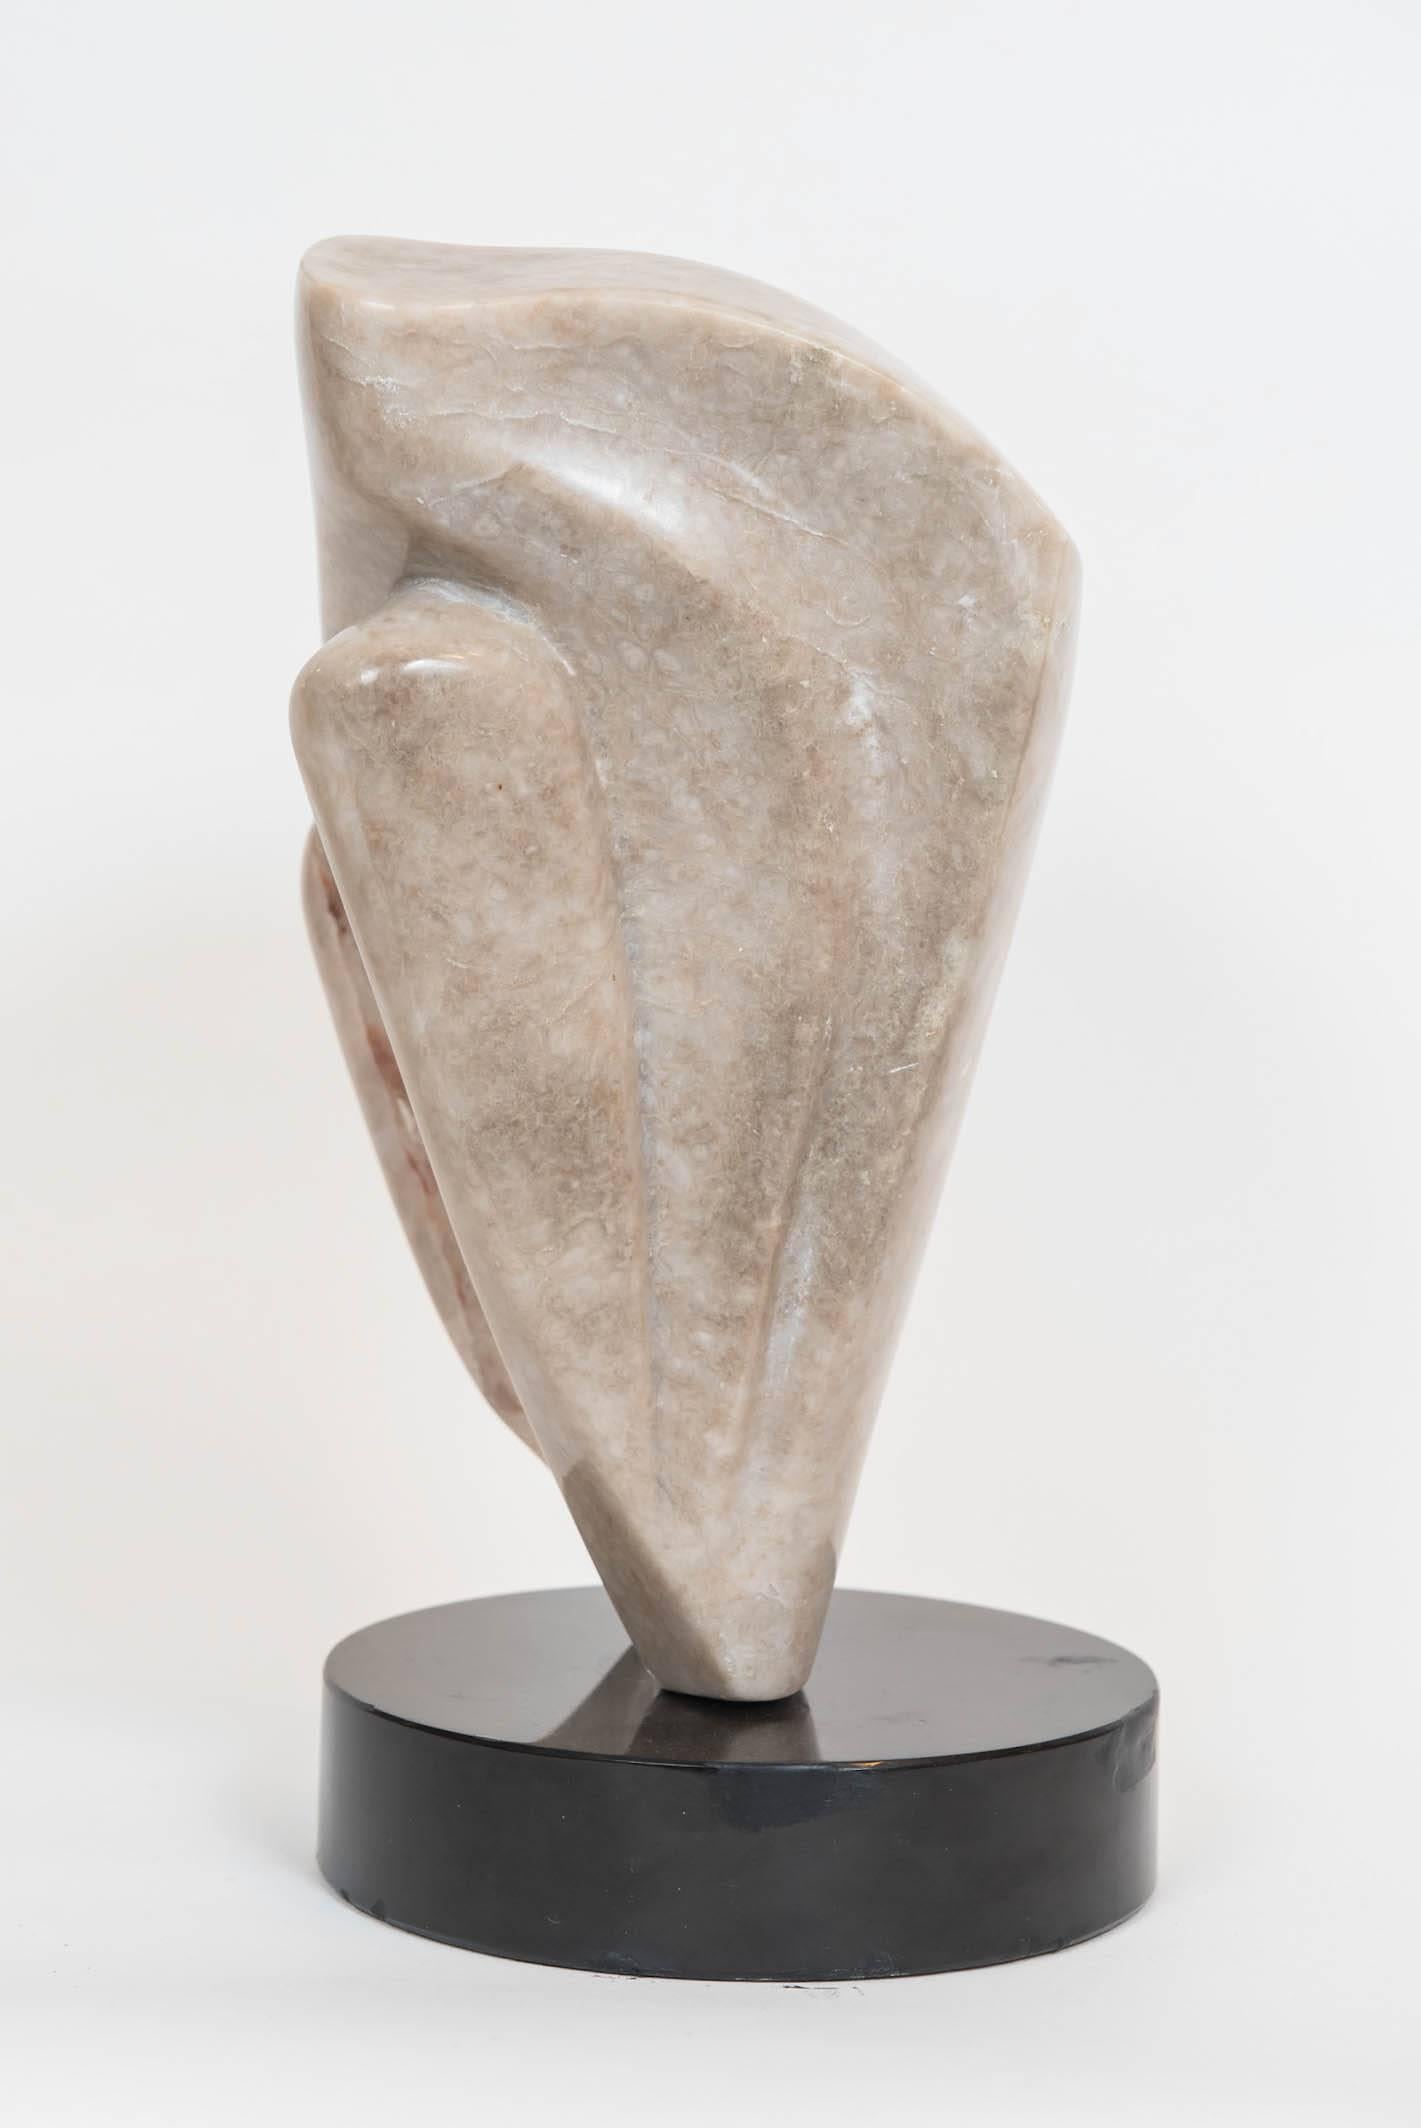 This great decorative abstract marble sculpture is mounted on a ebonized 8